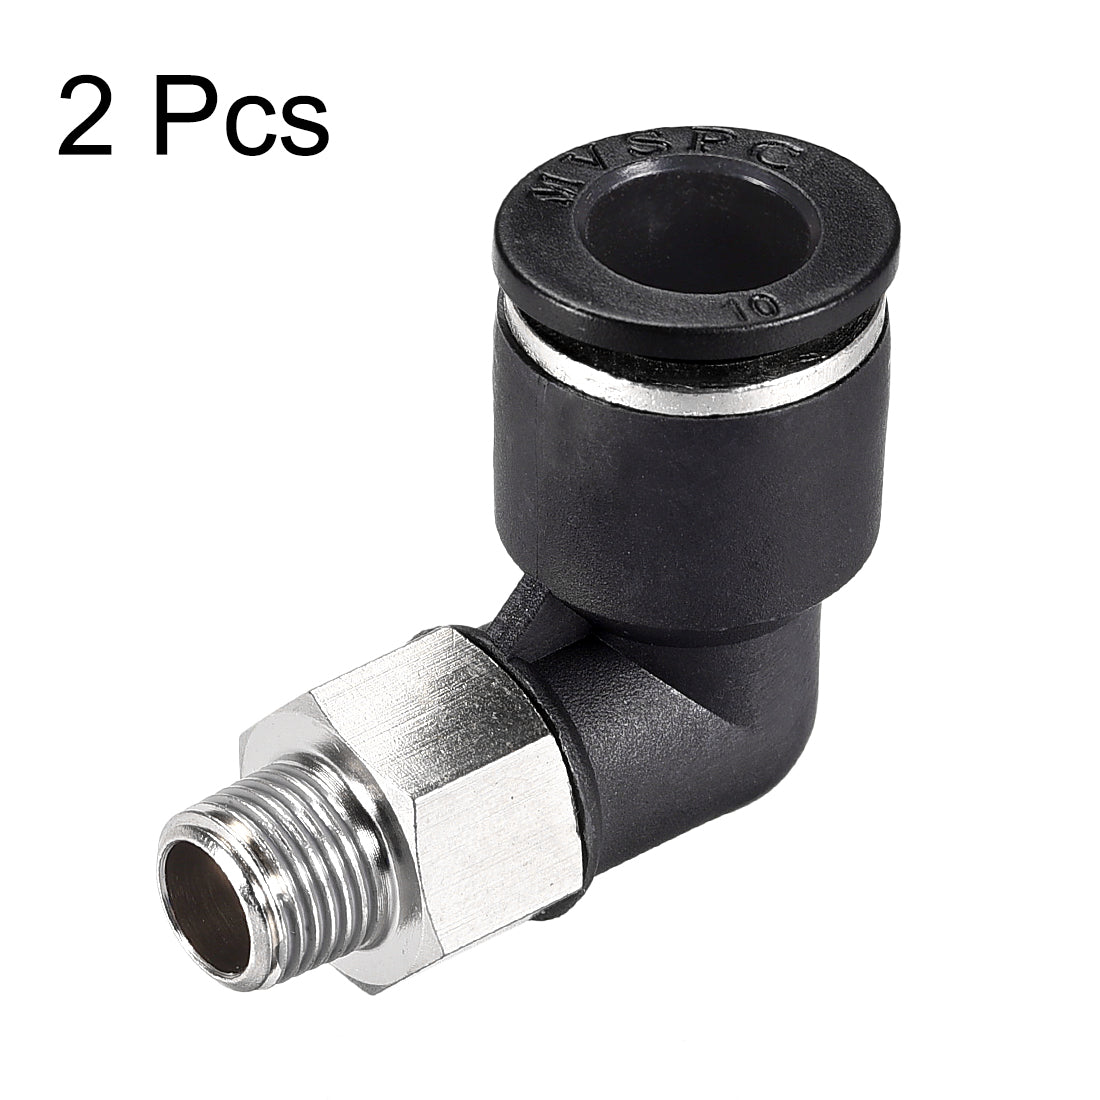 uxcell Uxcell Push to Connect Tube Fitting Male Elbow 10mm Tube OD x 1/8 NPT Thread Pneumatic Air Push Fit Lock Fitting 2pcs